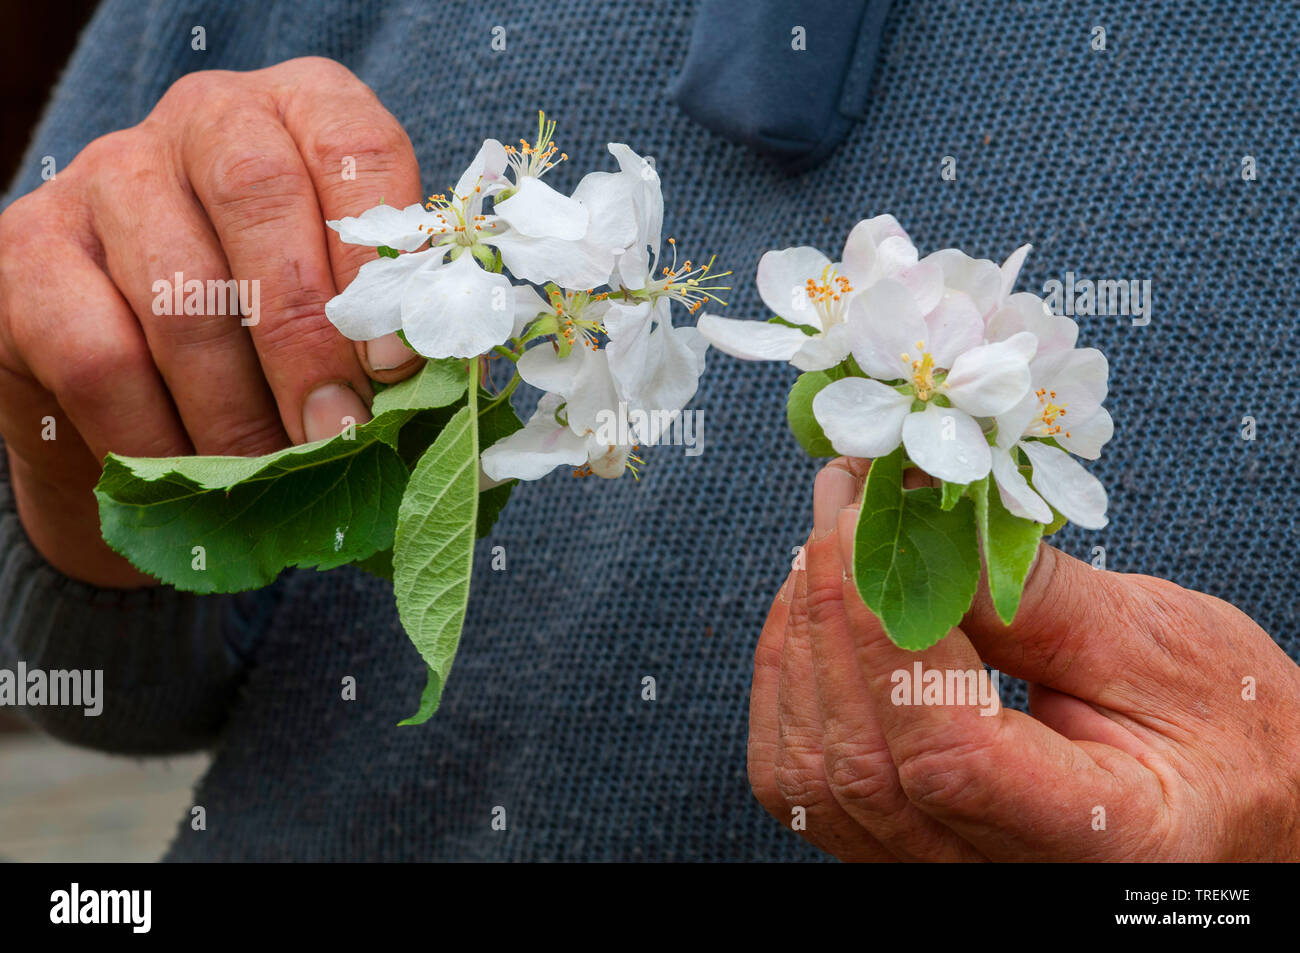 apple tree (Malus domestica), man comparing apple blossoms of different cultivars, Germany Stock Photo